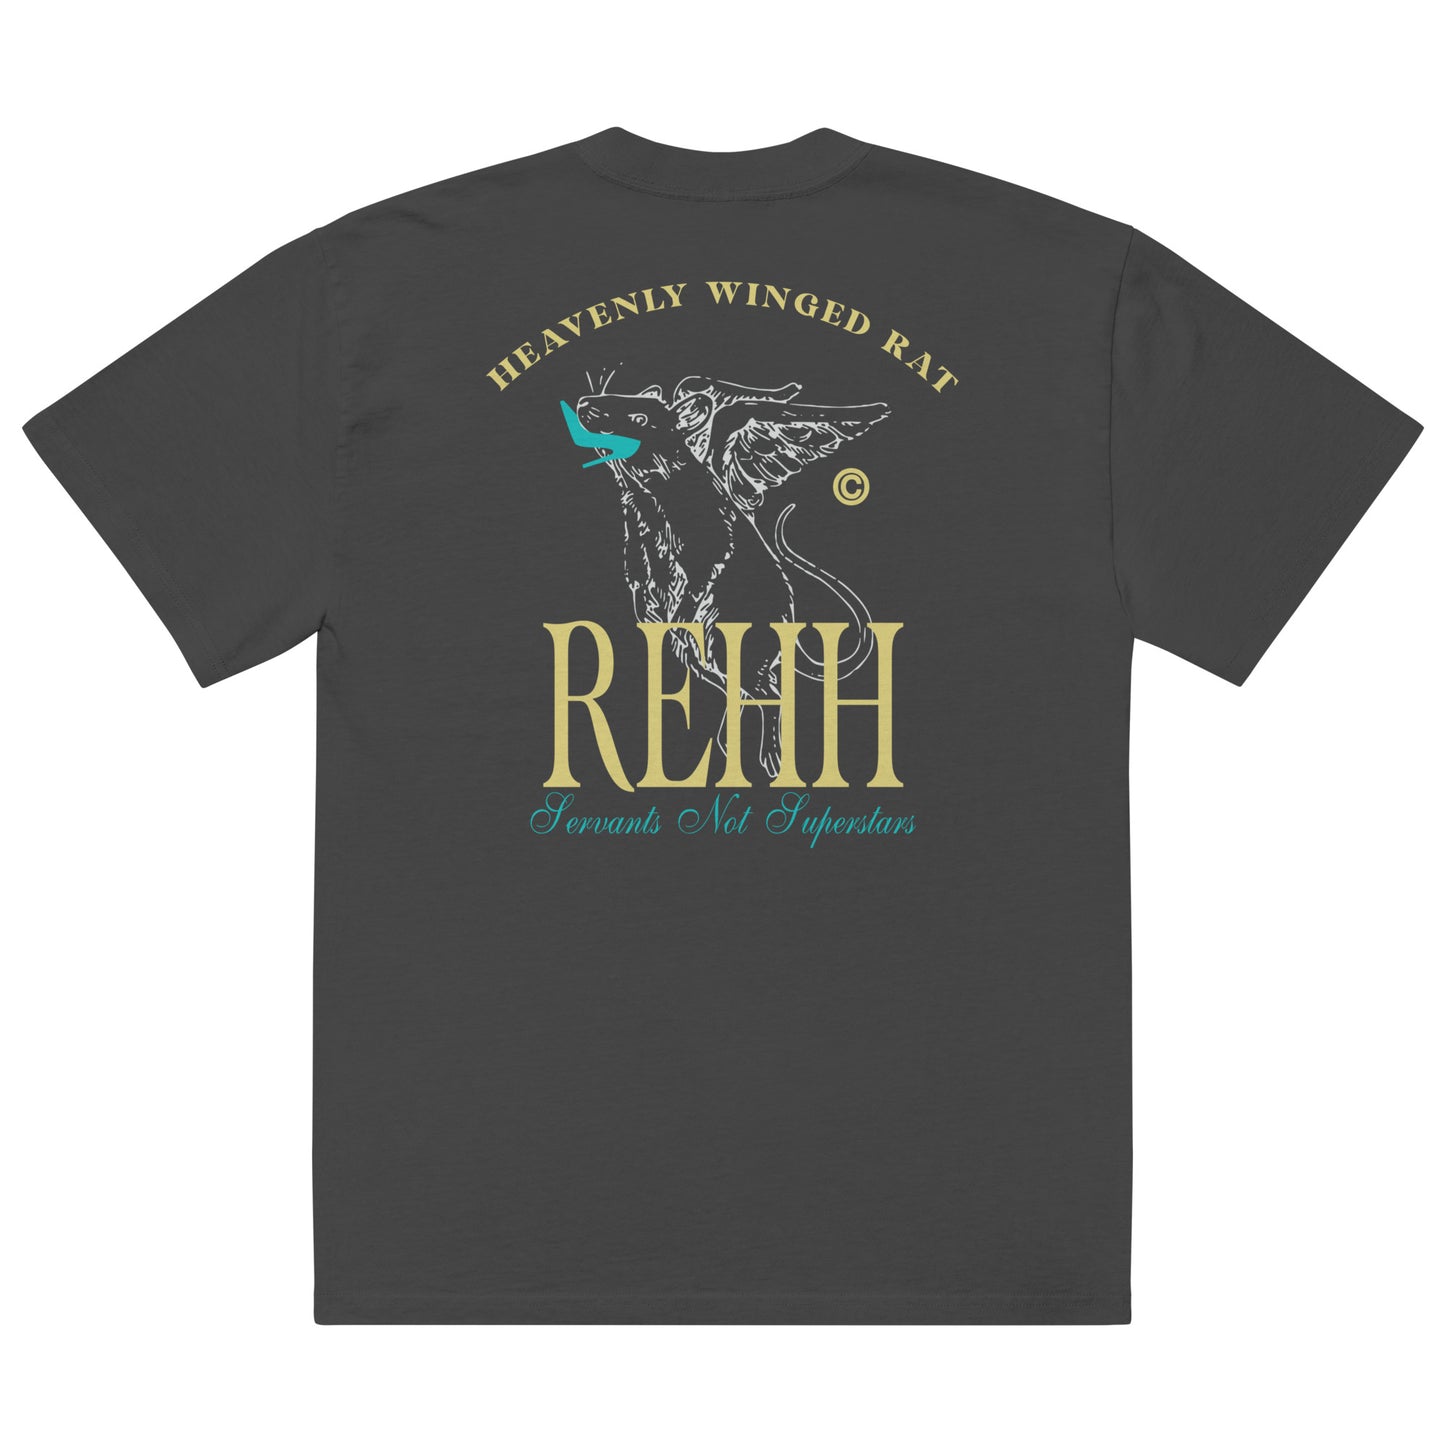 "Heavenly Winged Rat"  - Oversized faded t-shirt (Black)